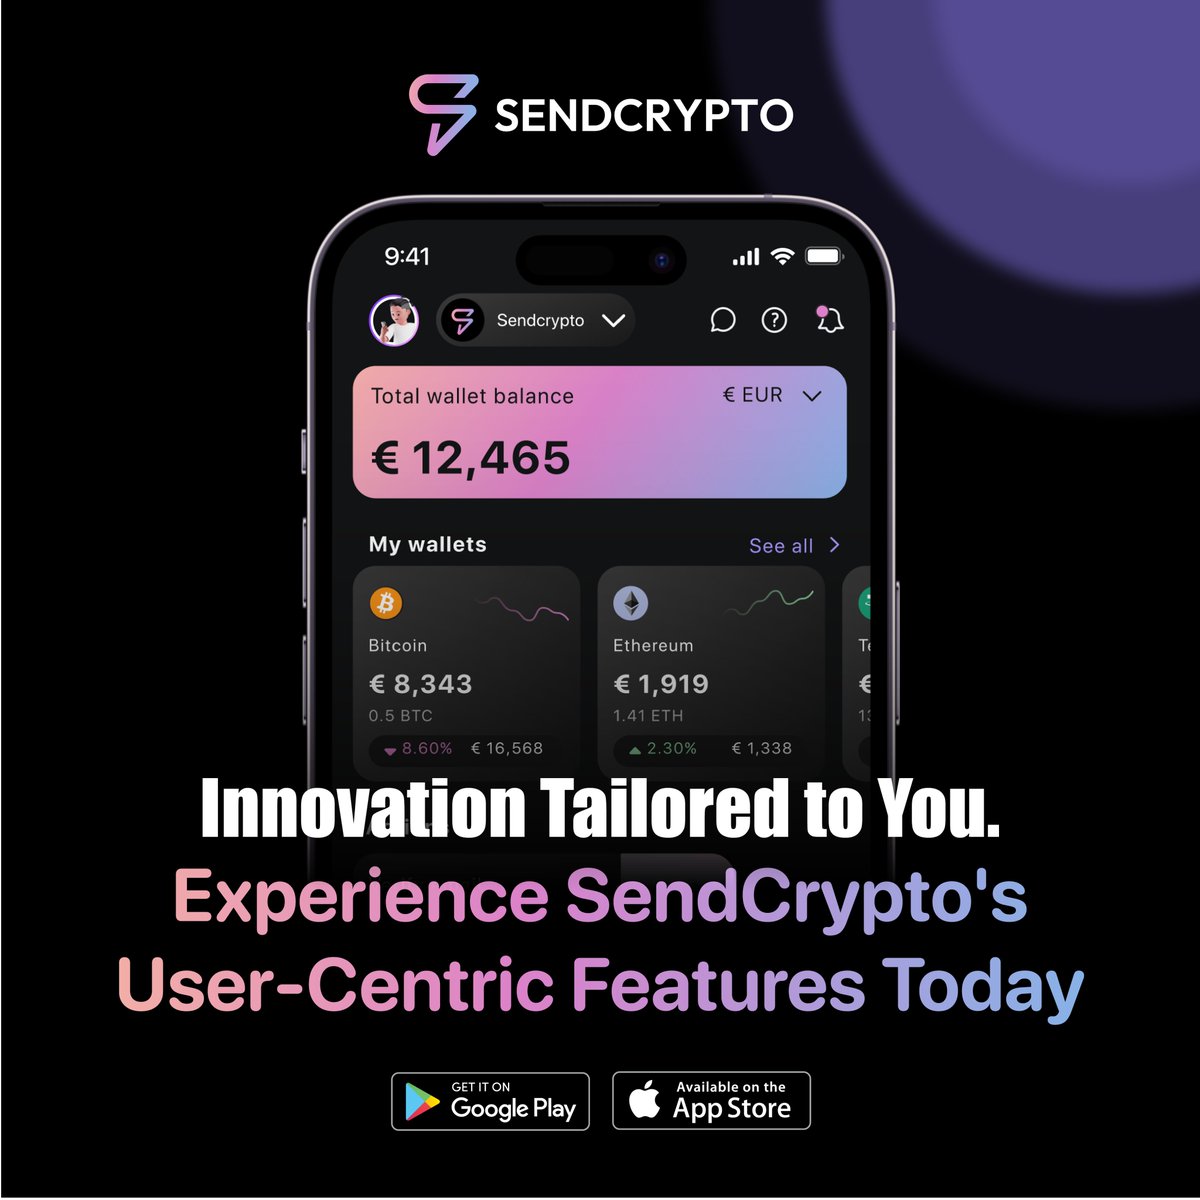 💡Innovation at the Core of #SendCrypto👇
👉As the digital finance landscape evolves, so do we. Our commitment to continuous innovation ensures we stay at the forefront, offering cutting-edge features for a superior user experience💻

#dapp #defi #web3 #TechLeaders #CryptoTech